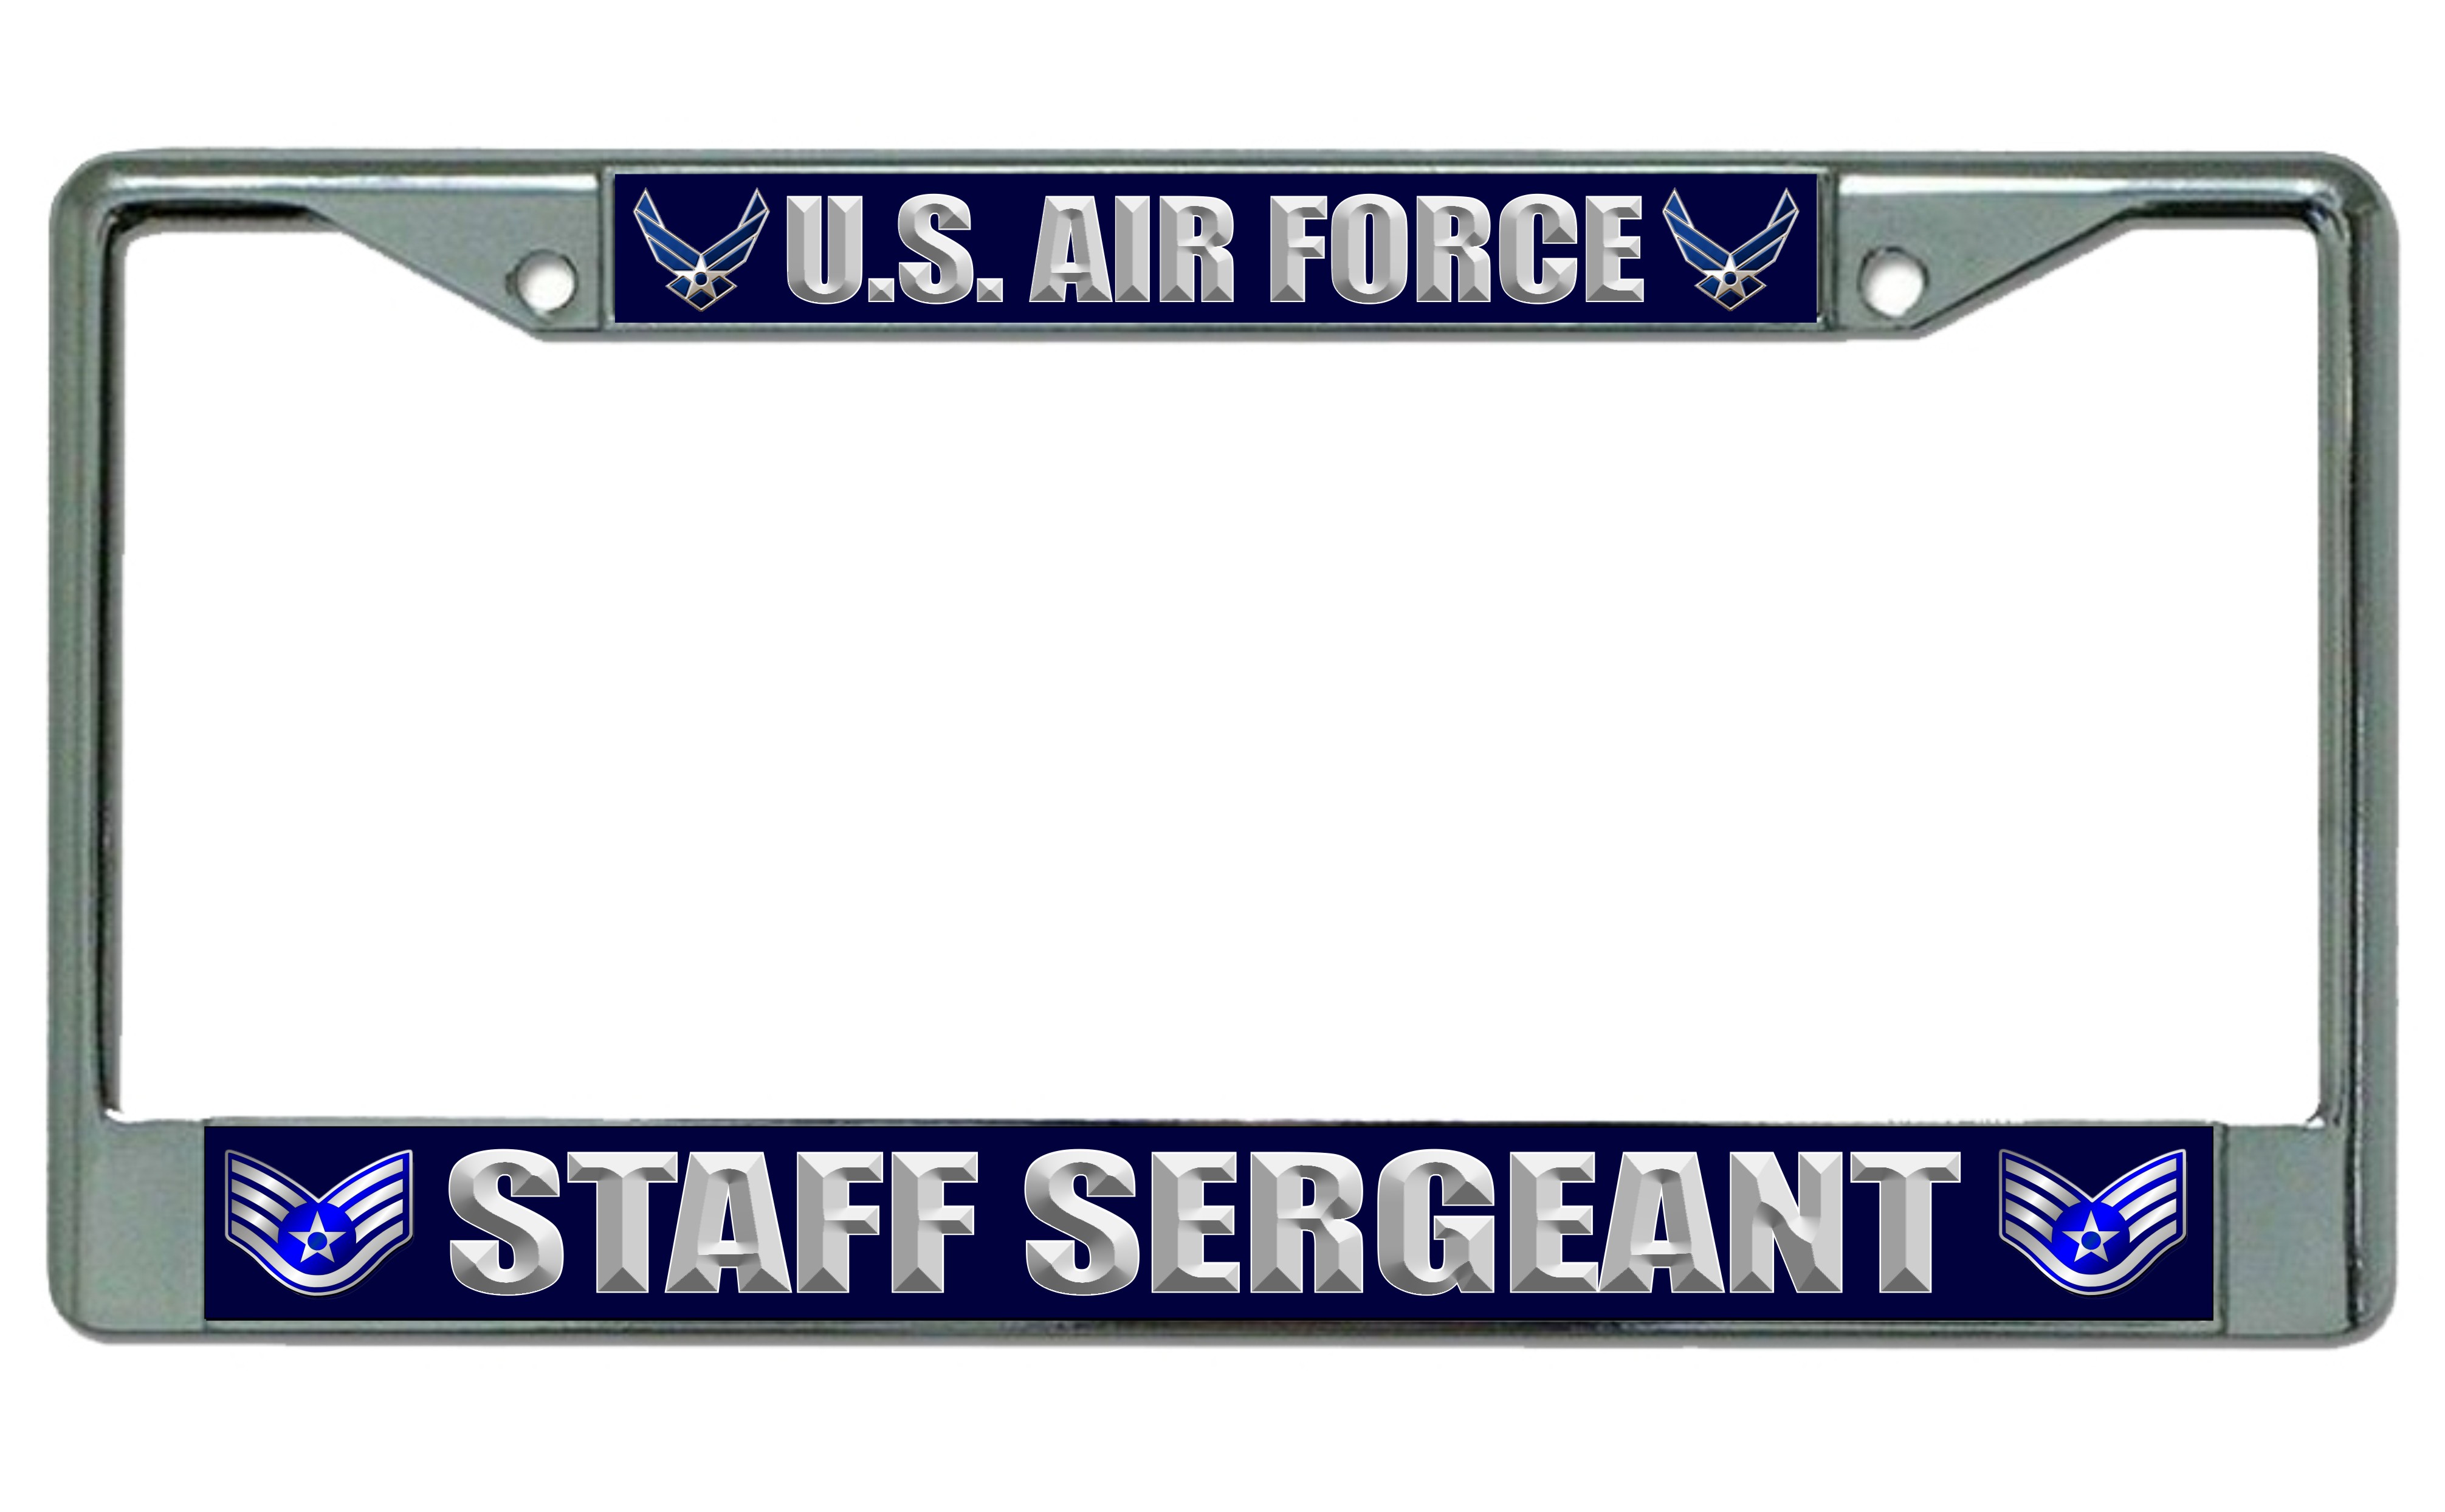 U.S. Air Force Staff Sergeant Photo License Frame.  Free SCREW Caps Included